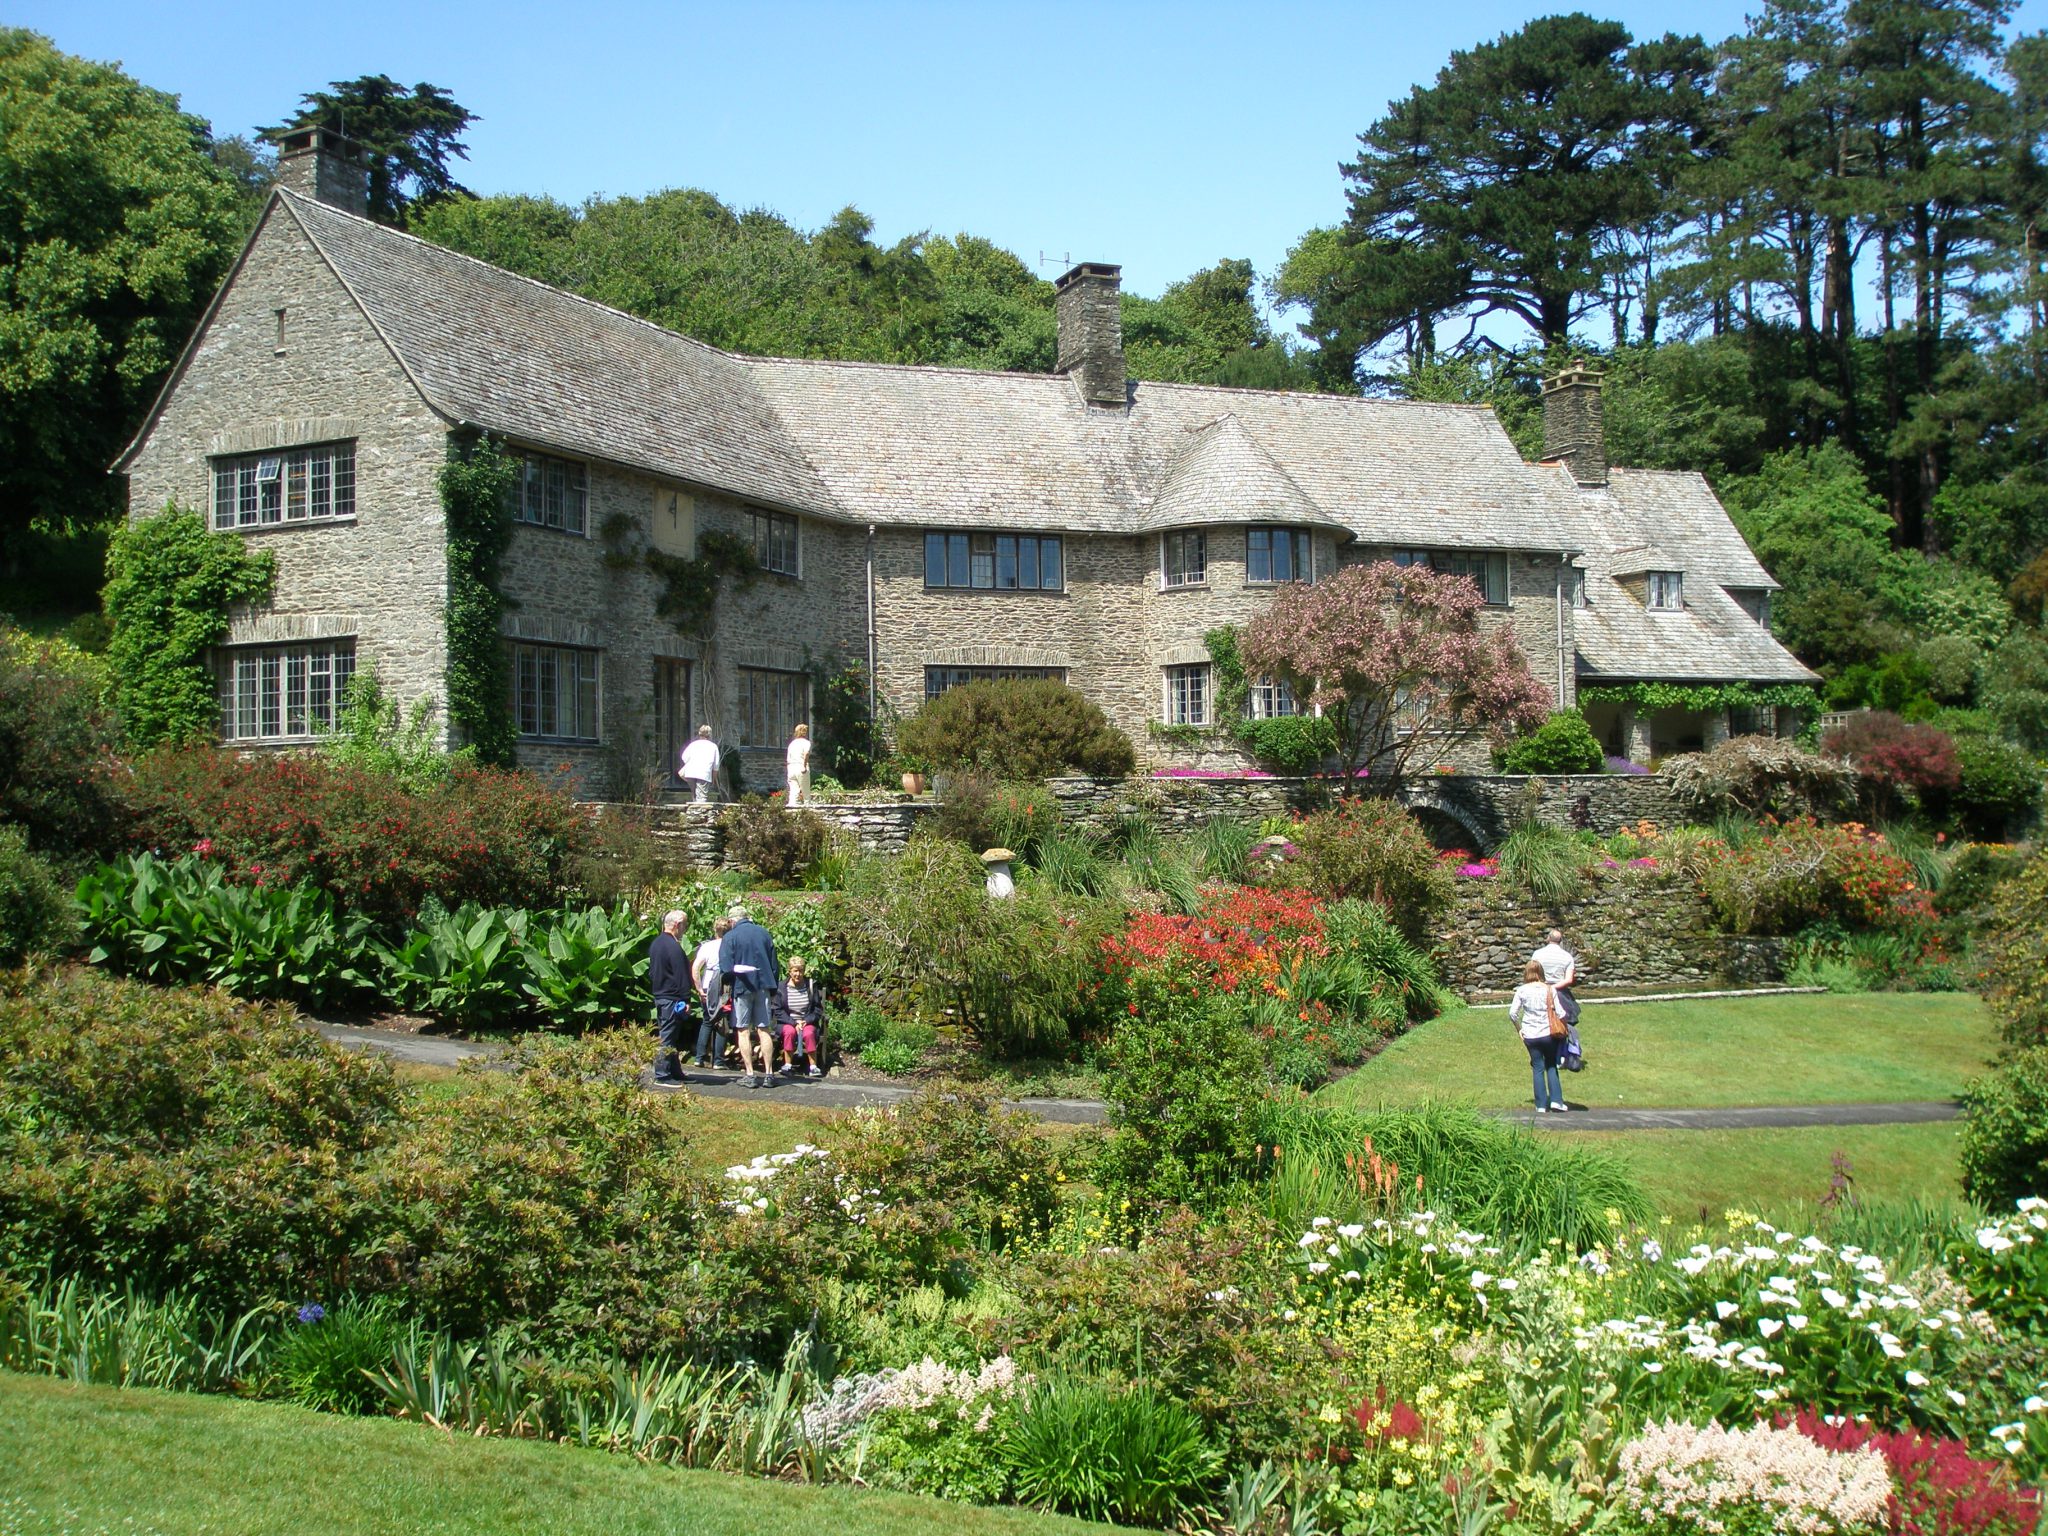  At Coleton Fishacre, by Pudcombe Cove, on the South Devon coast, we see a perfect, harmonious interplay of architecture and gardens and the greater landscape. The country retreat of Rupert and Lady Dorothy D’Oyly Carte began to be created in 1923. Rupert, the son of impresario Richard D’Oyly Carte, was the manager of the hugely popular—and profitable—Gilbert & Sullivan empire of operettas, as well as the owner of the Savoy Hotel and Claridge’s, in London. The Arts and Crafts-styled stone house and terraces were constructed largely from Dartmouth shale, which was quarried on site. On July 2nd, 2015, after a morning of dense fog and driving rain, the skies cleared, and Coleton Fishacre, which during the first hours of my visit had seemed to be a spooky Daphne-DuMaurier-setting-made-real, was transformed into the glistening, cheer-inducing, jewel-by-the-sea that you see here, and which we will explore at length, in the final portion of this Travel Diary.